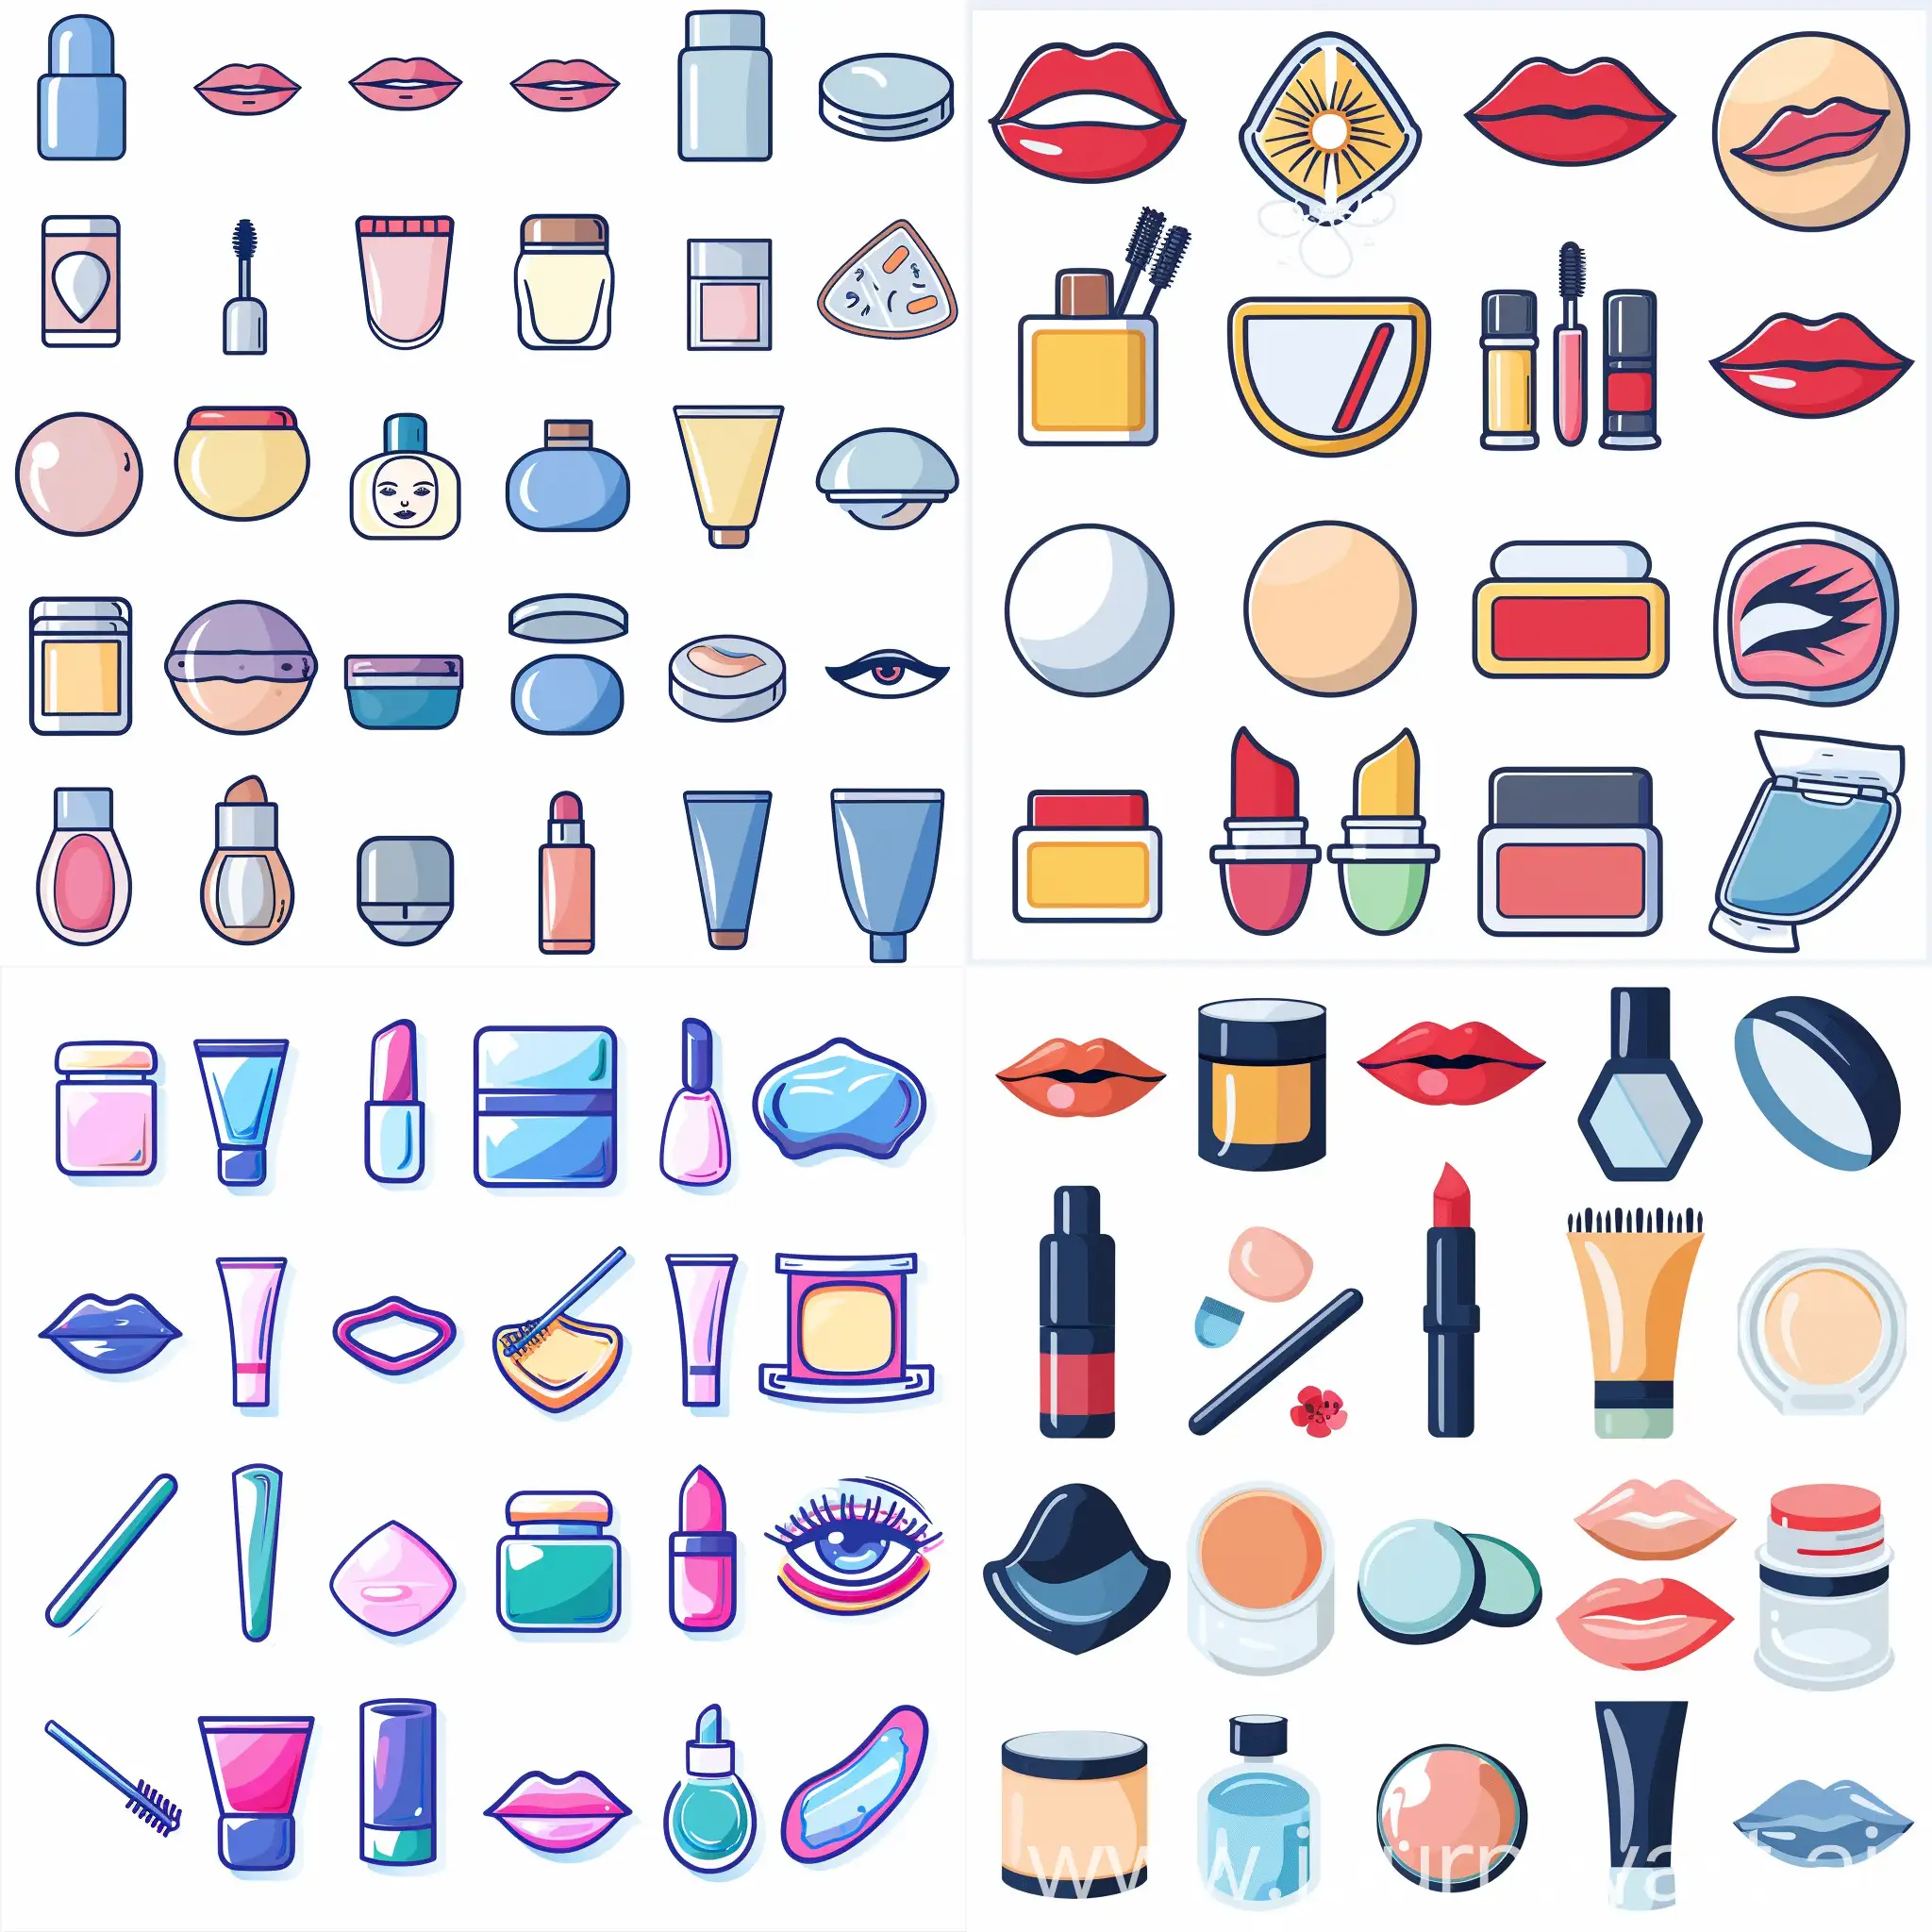 Assorted-Cosmetics-Icons-Creams-Lip-Balms-Lip-Glosses-and-More